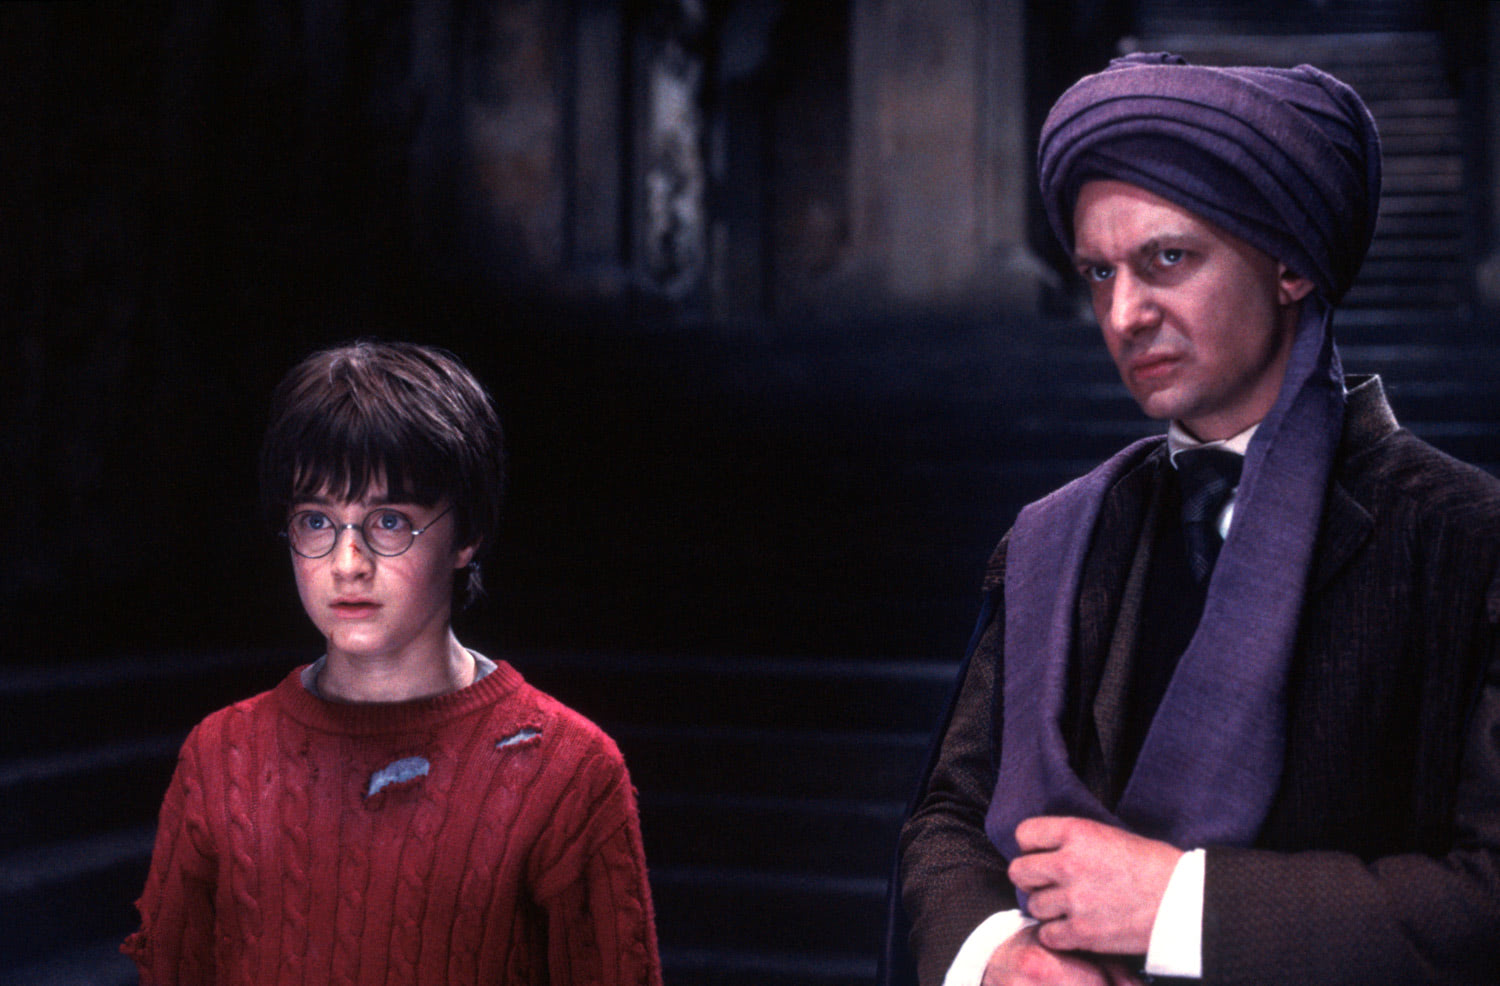 Harry and Quirrell